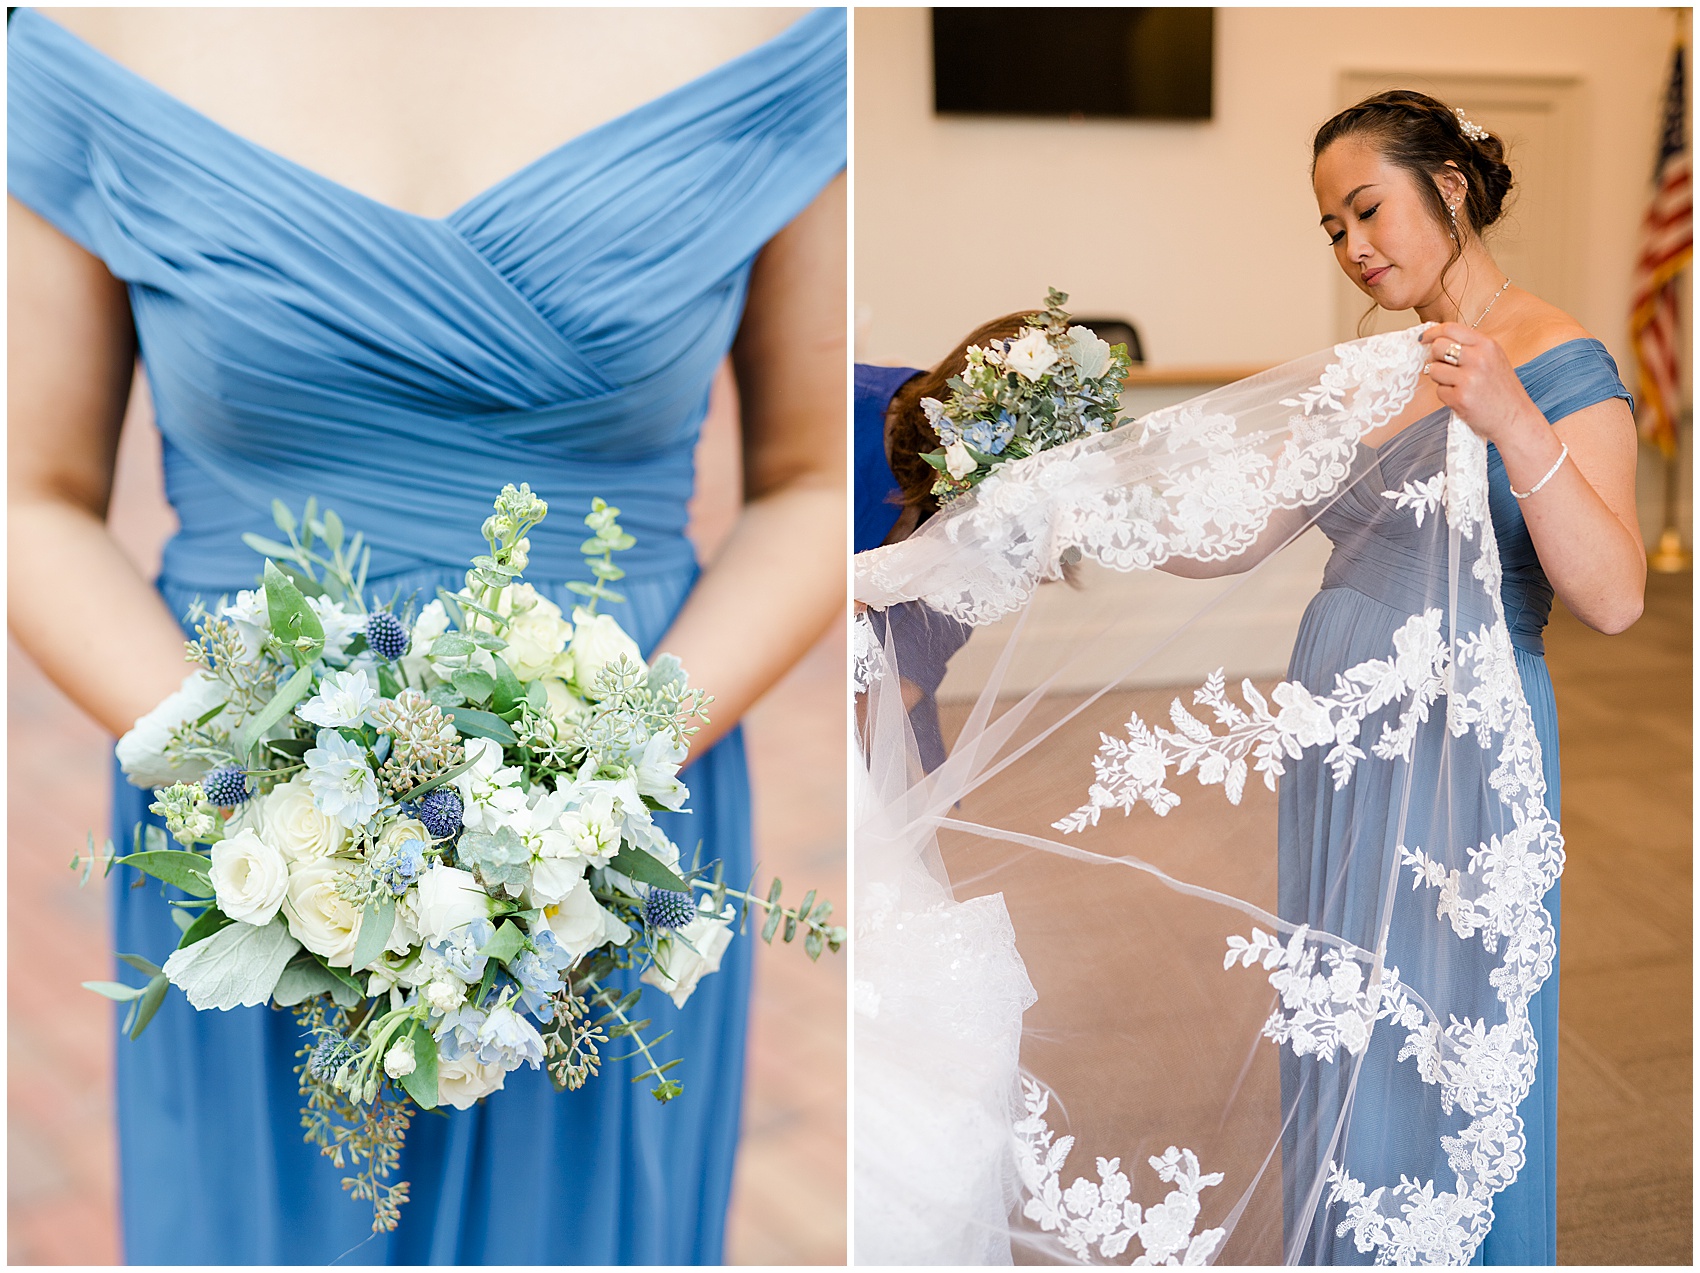 details of bridesmaid's bouquet and helping with the veil